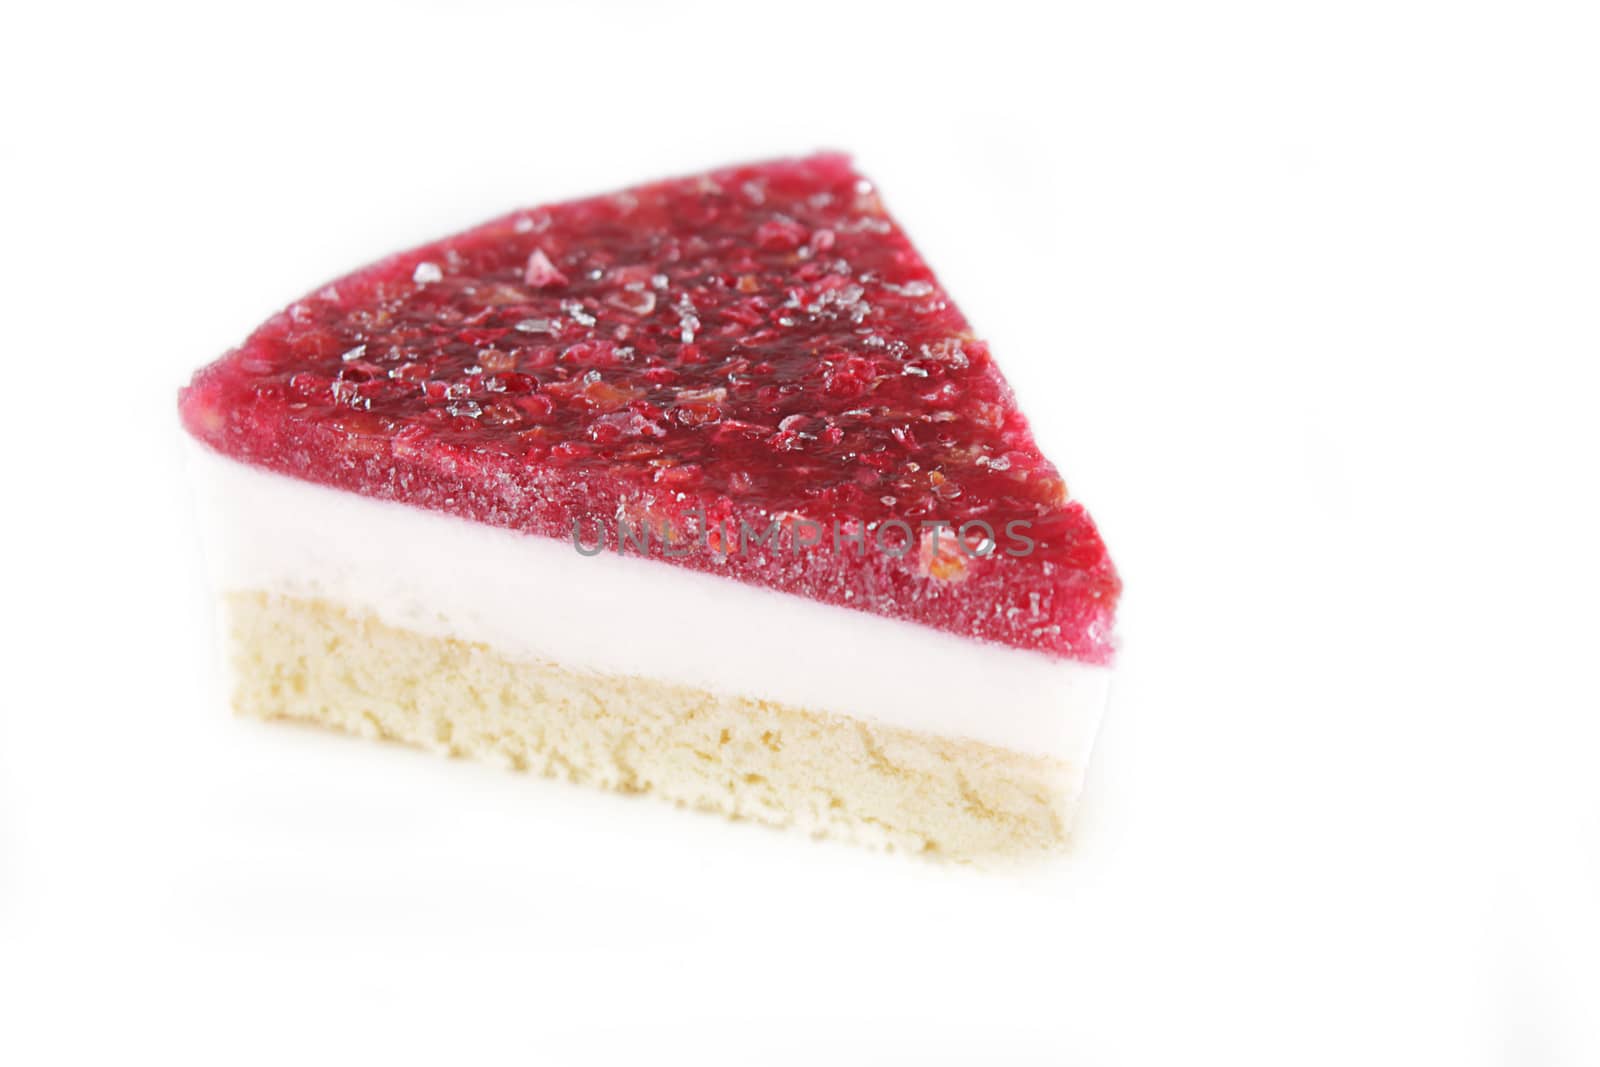 Piece of cheesecake with raspberry over white